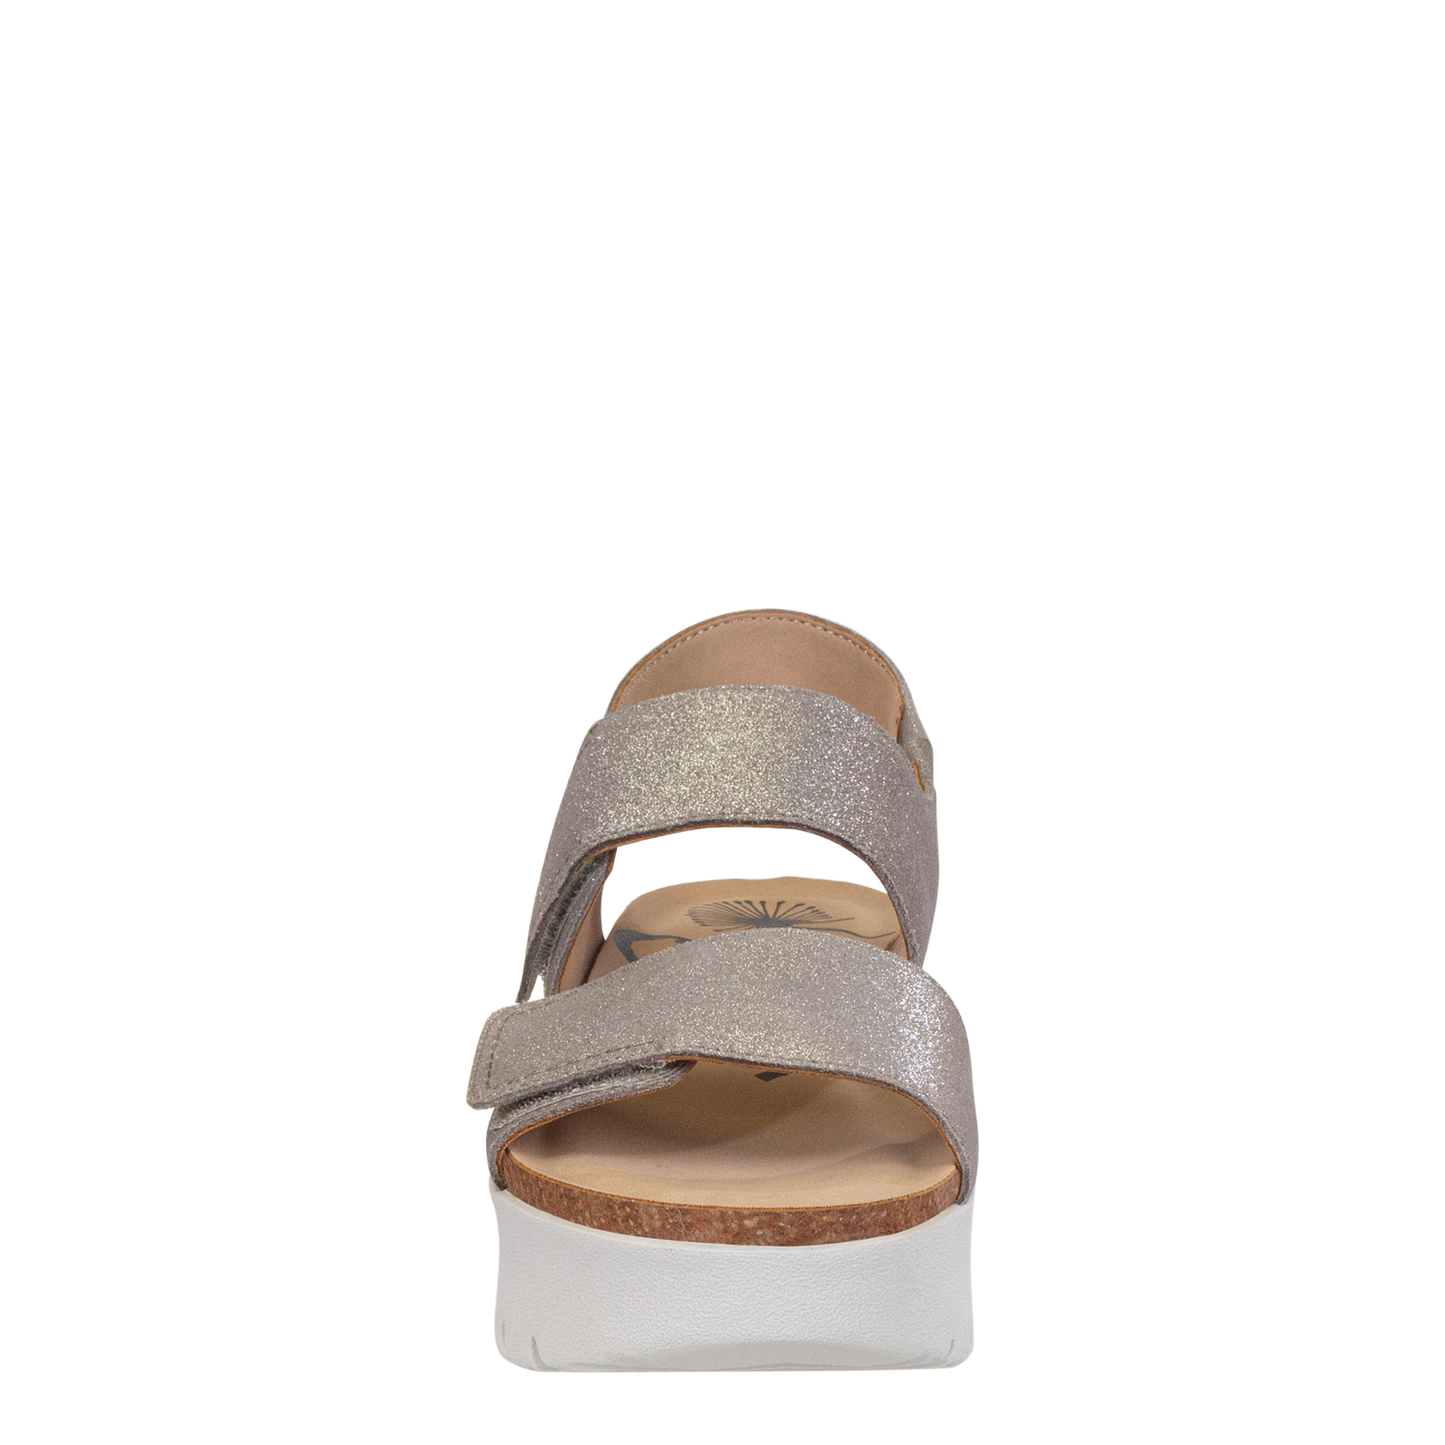 OTBT - MONTANE in SILVER Heeled Sandals